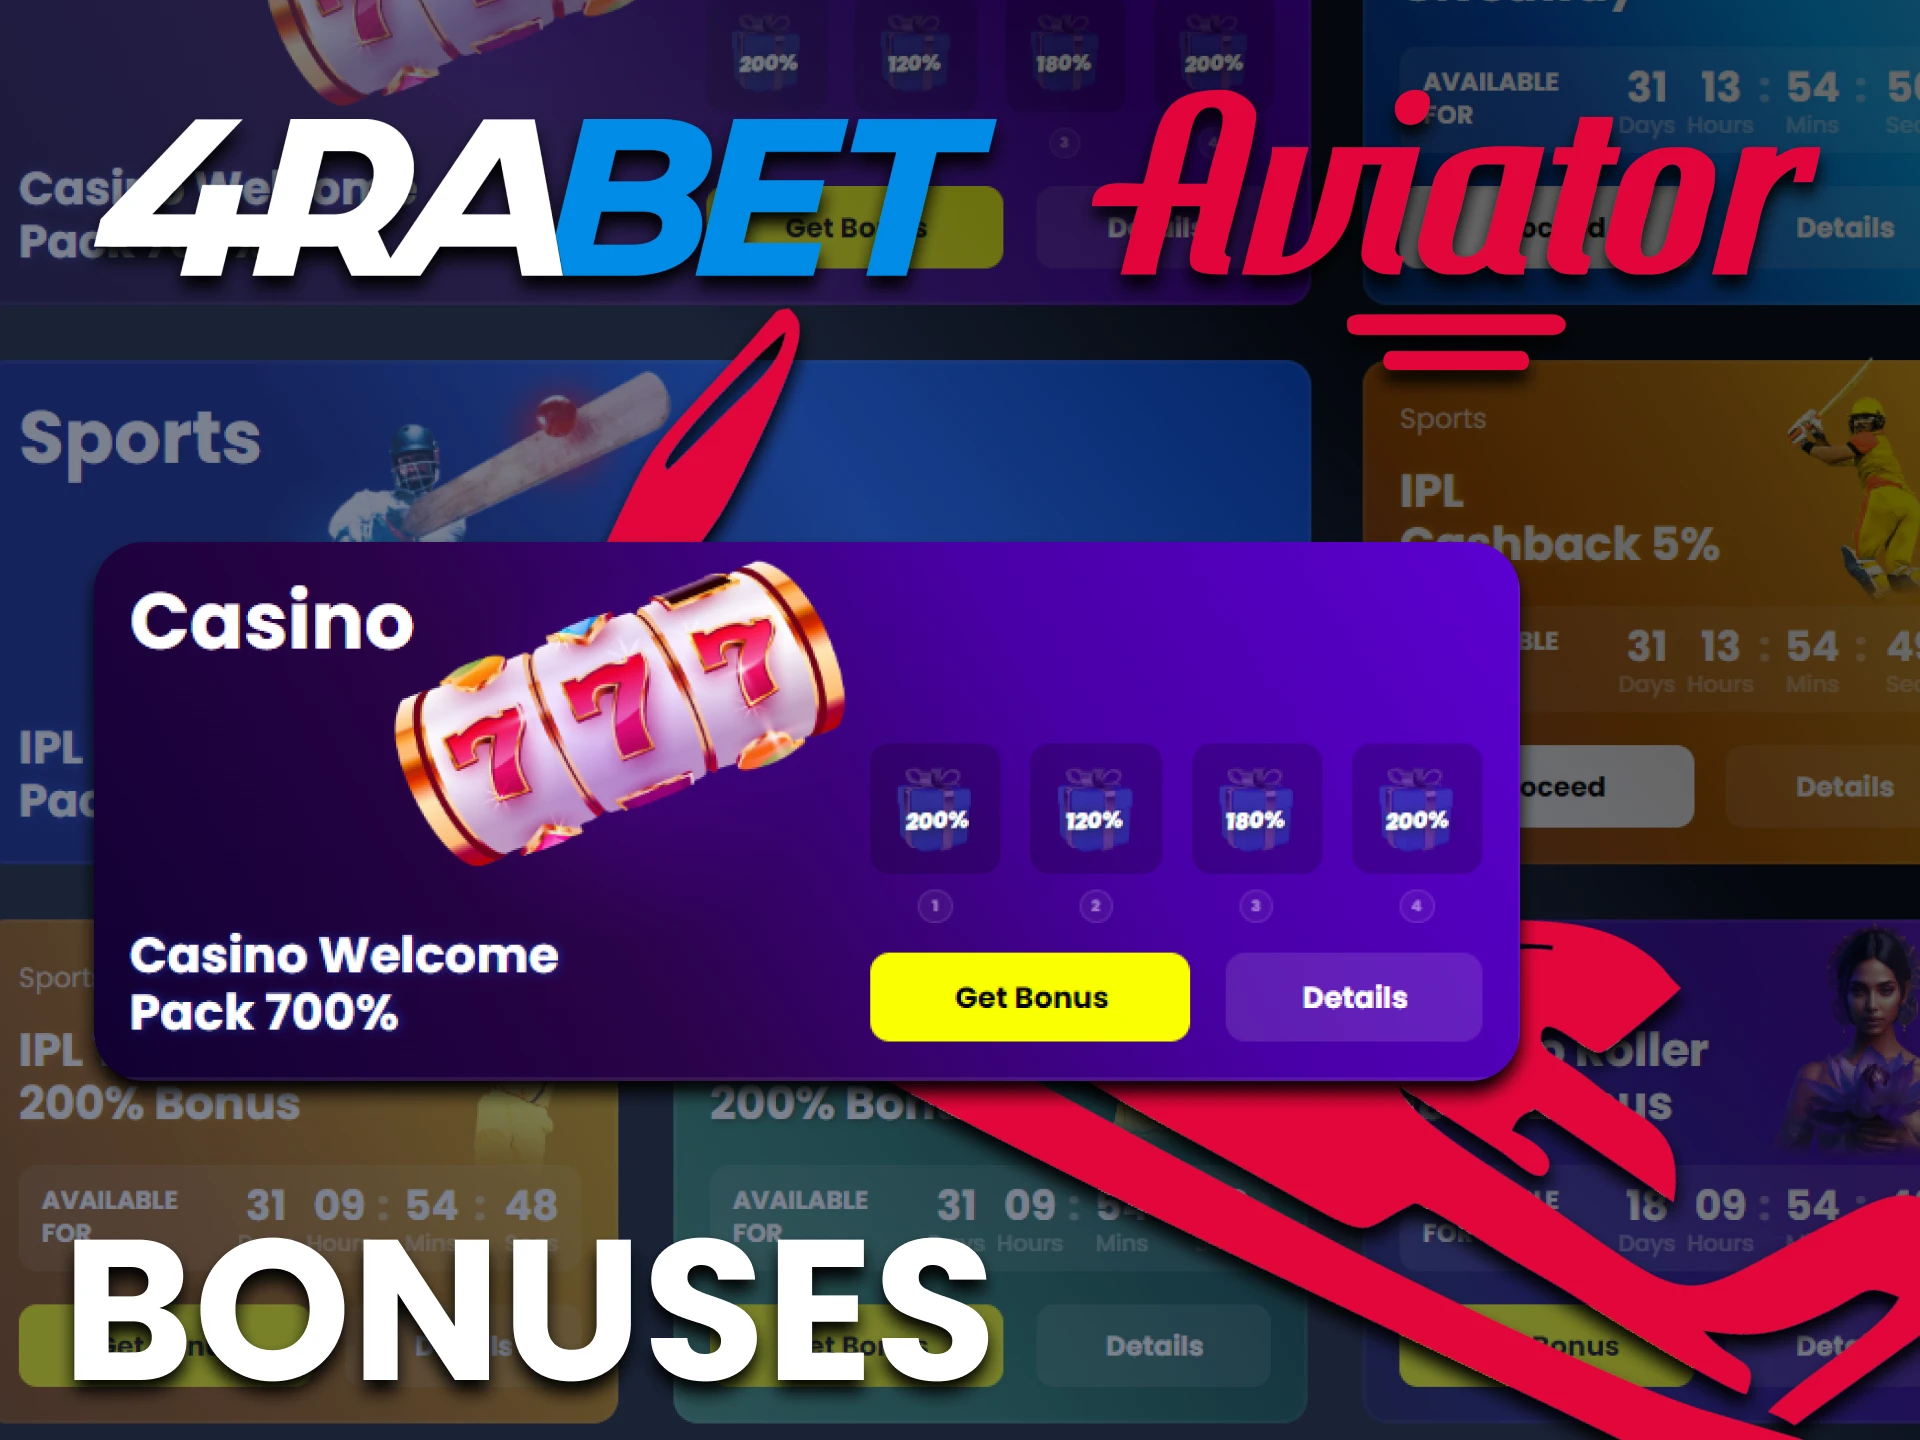 Use casino bonuses of 4rabet to get more profit from playing Aviator.